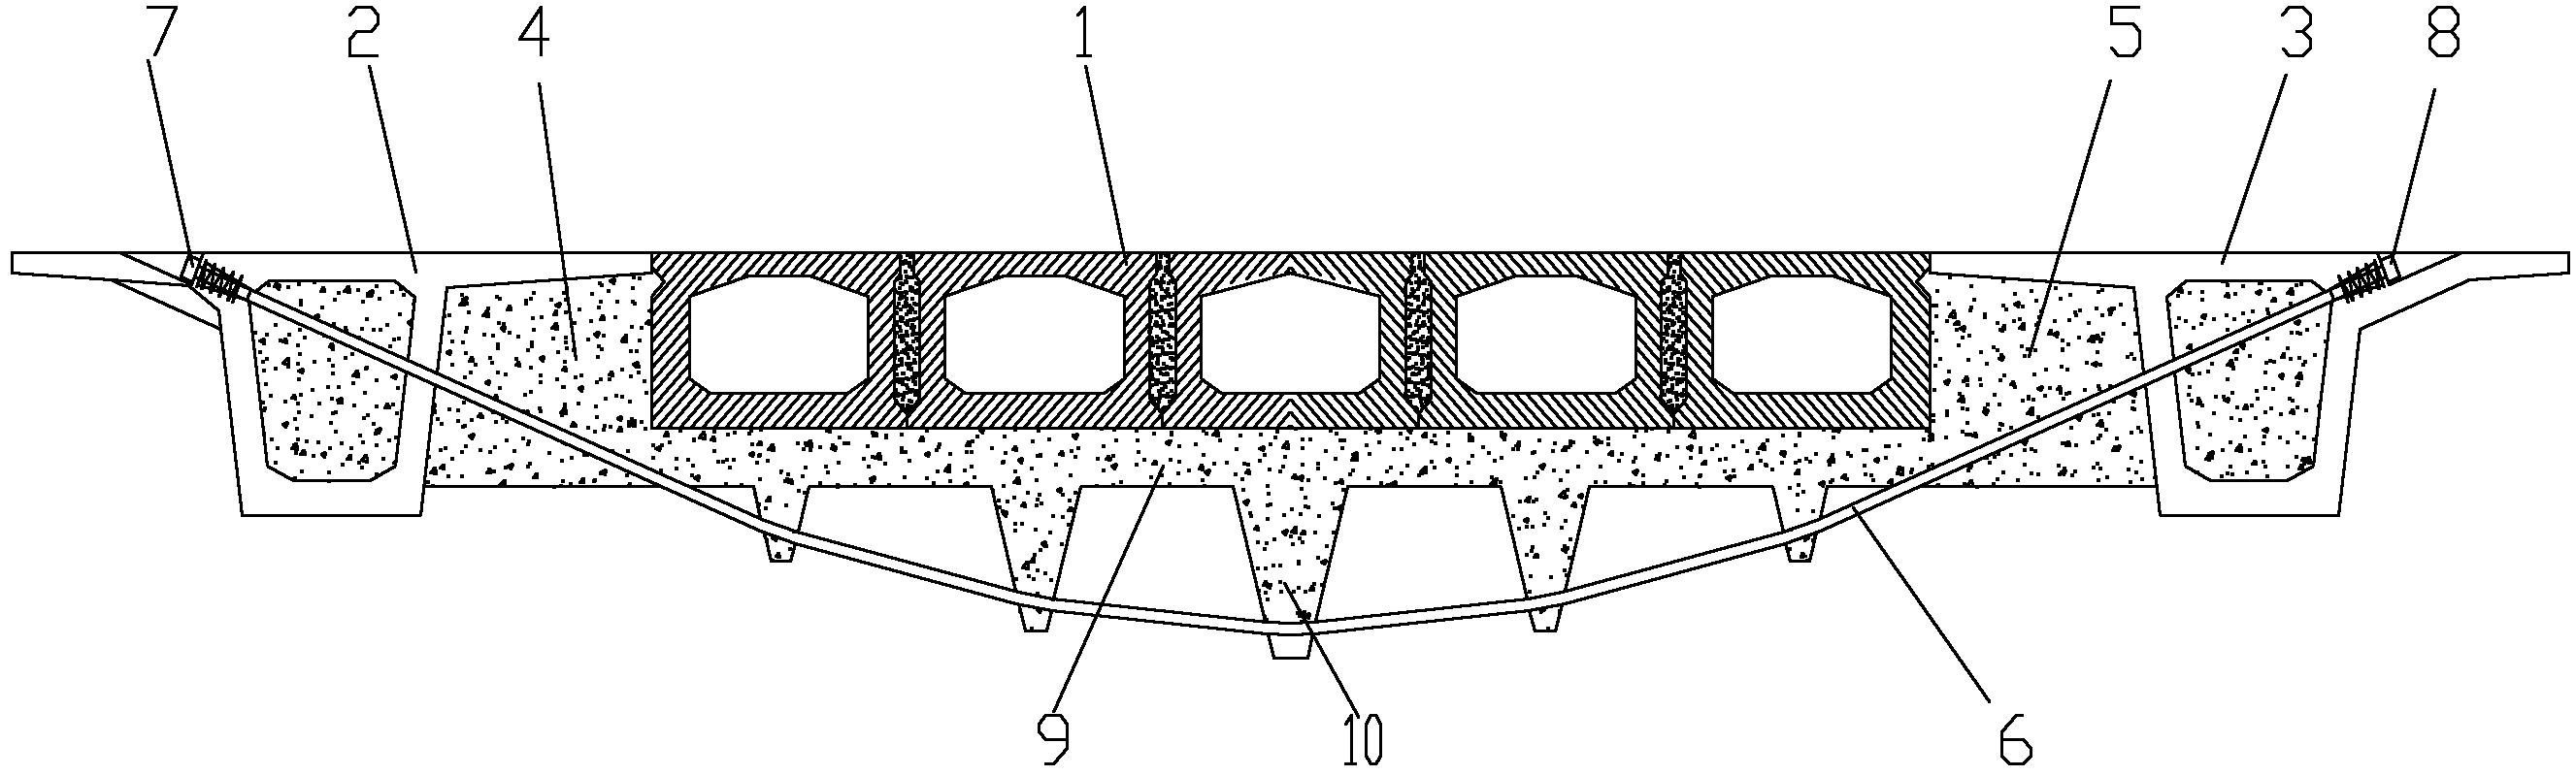 Pre-stressing reinforced and widened bridge structure